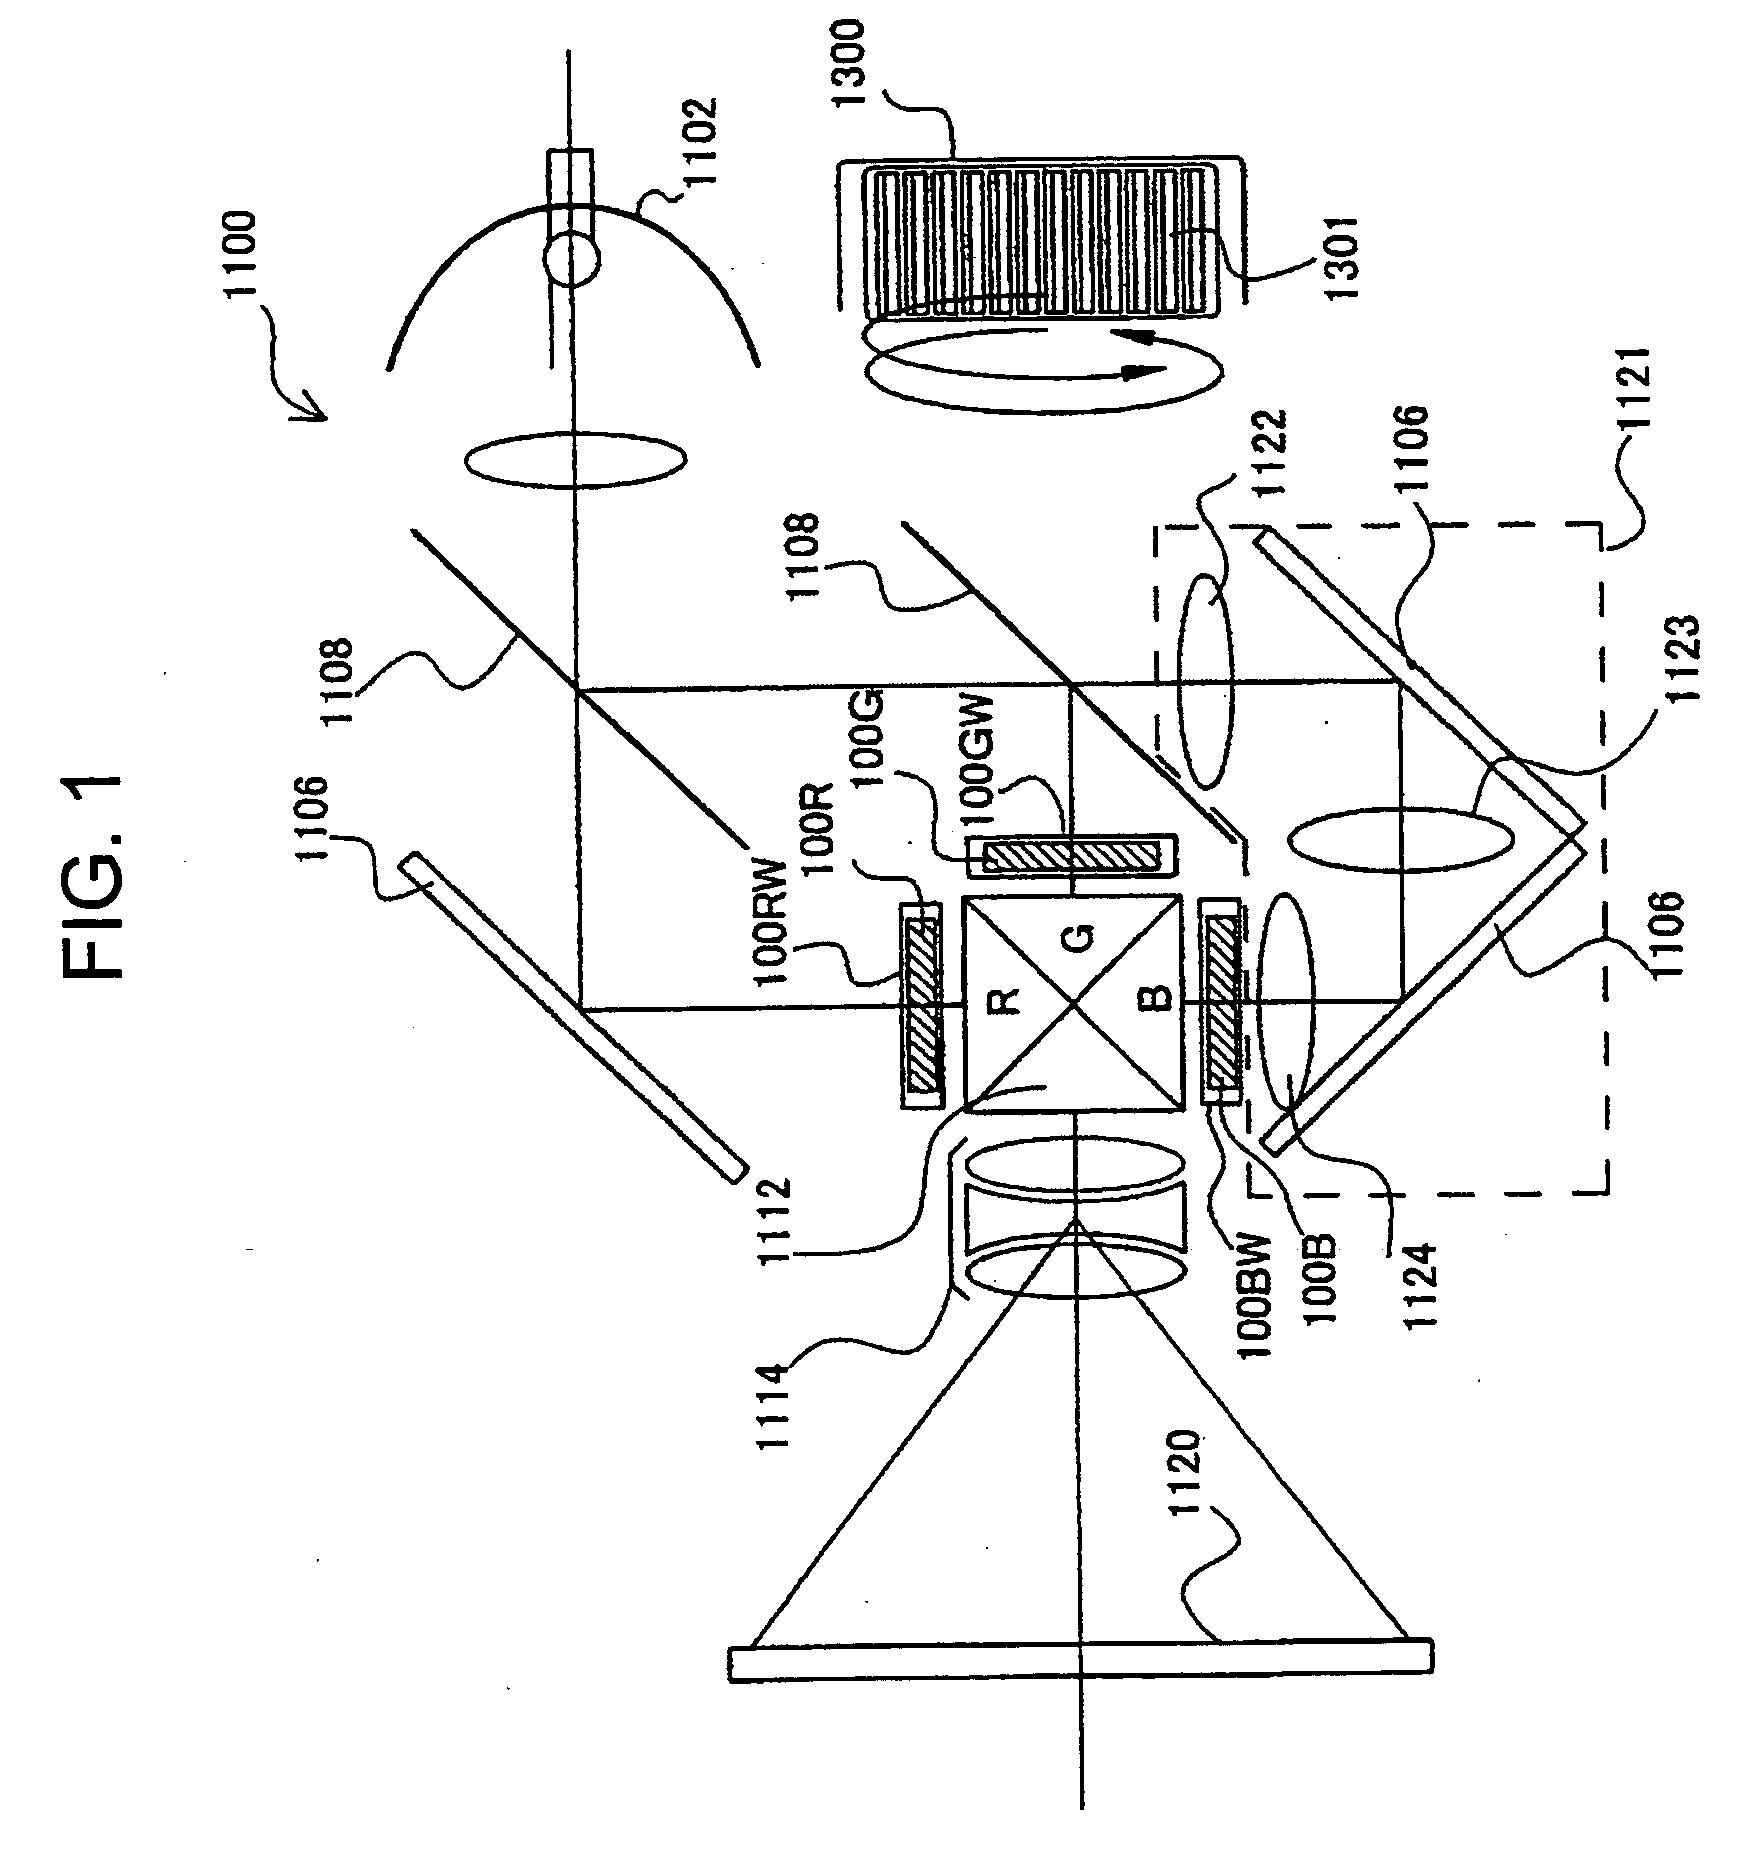 Mounting case for electro-optical device, electro-optical device and electronic apparatus